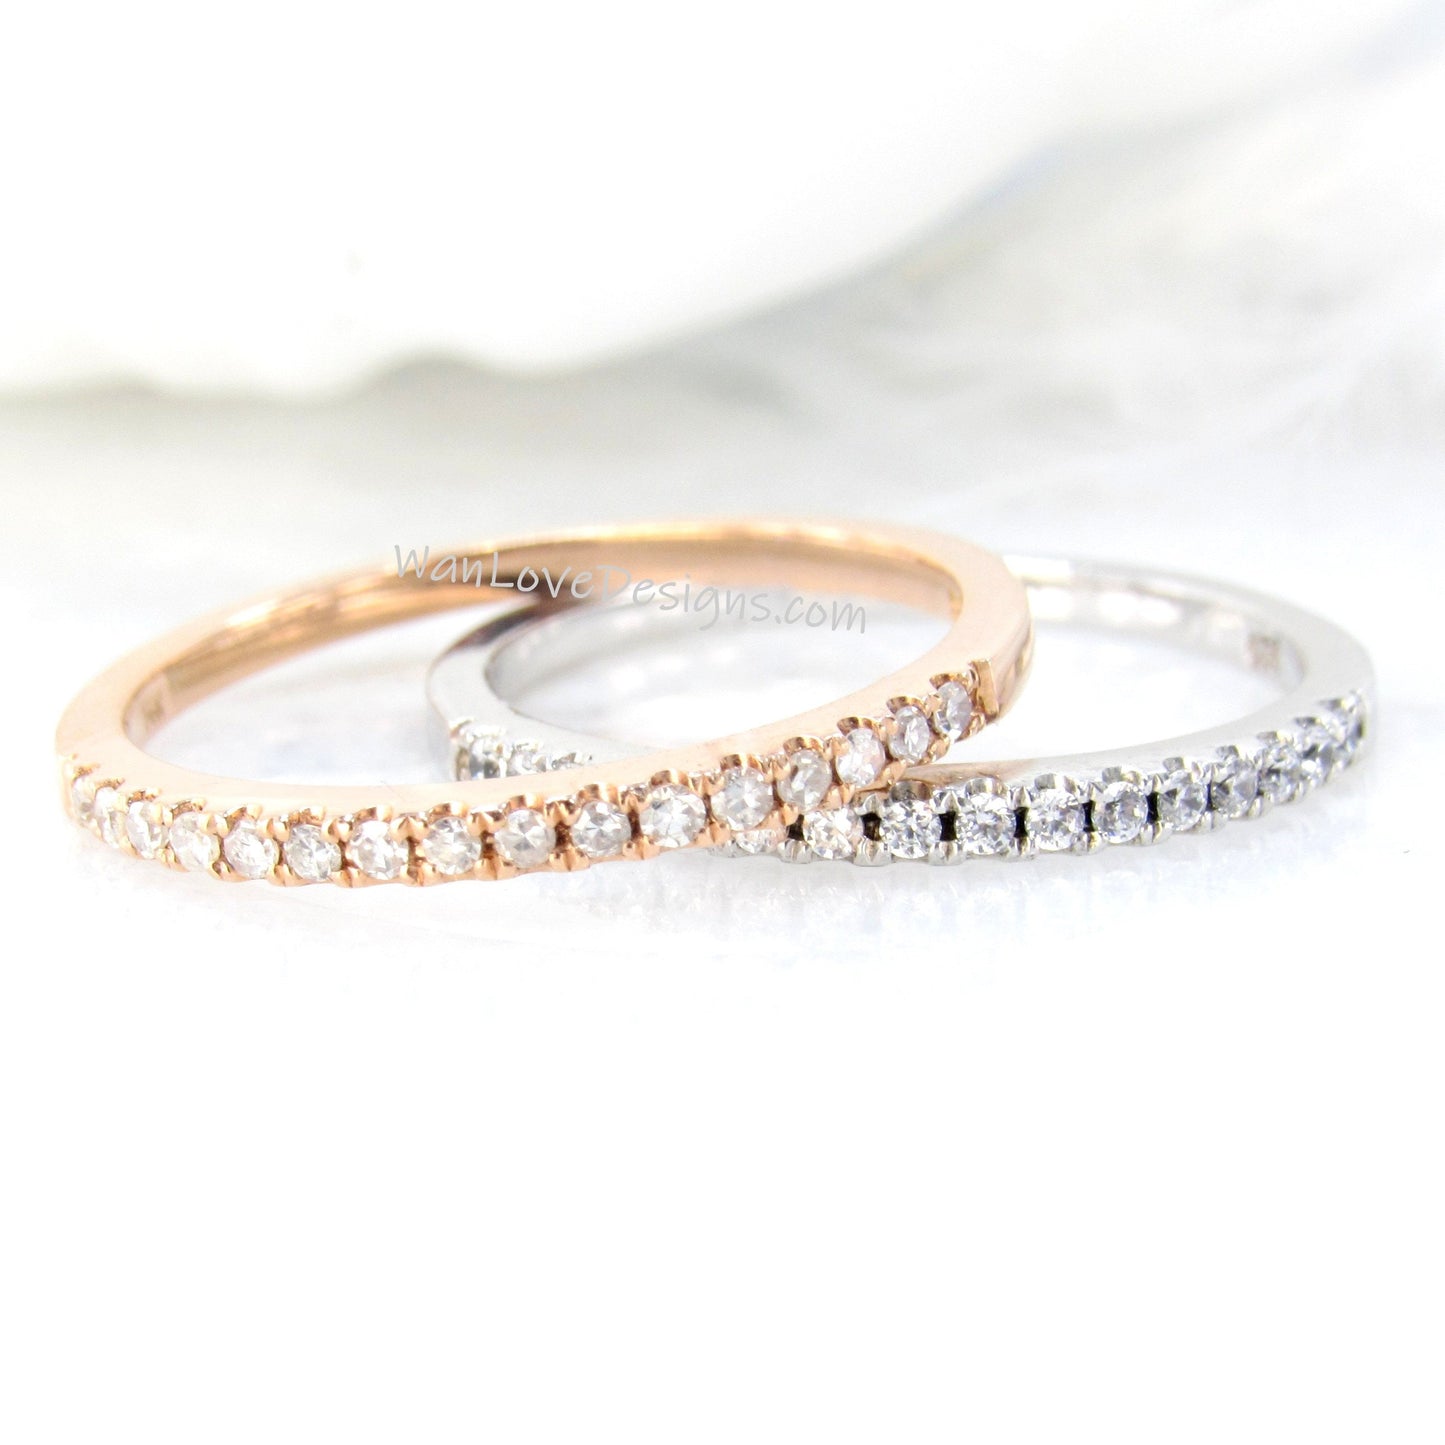 Women's Birthstone Half Eternity Wedding Band, 14k Solid Gold Ring, Stackable Band, Stacking Ring, Wedding Ring, Engagement Ring Band